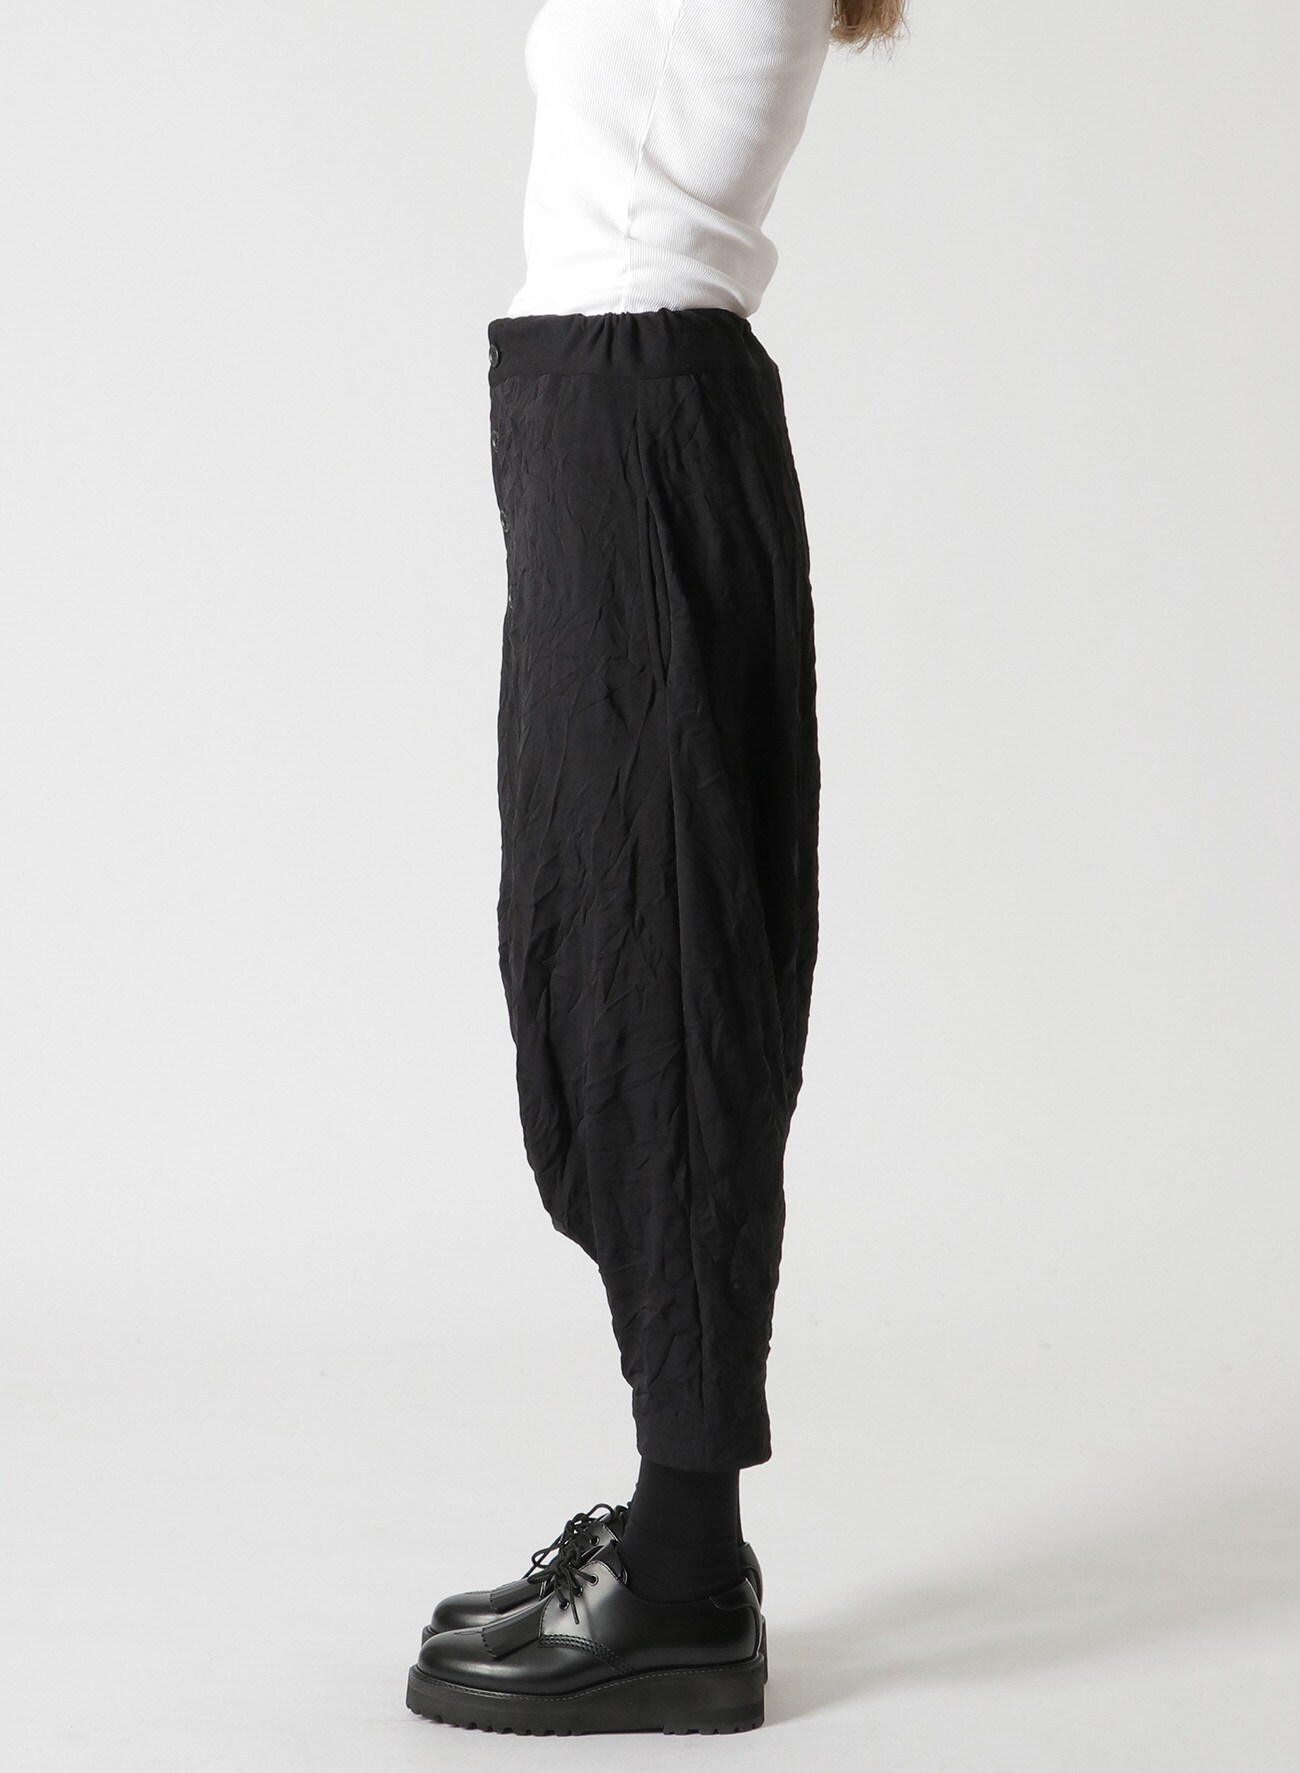 WRINKLED POLYESTER 4-BUTTON SAROUEL PANTS